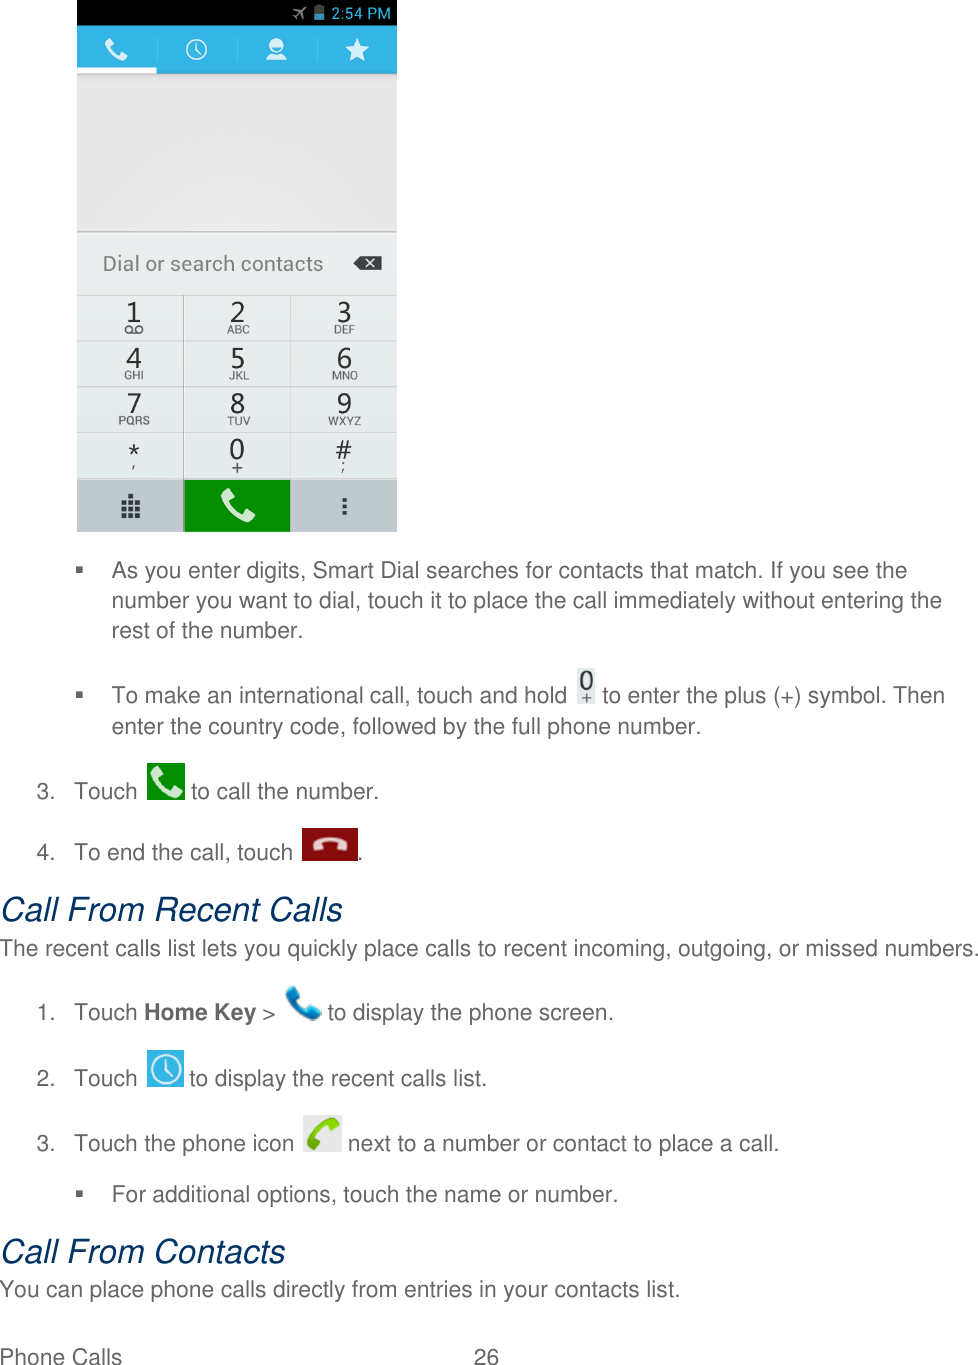 Phone Calls  26       As you enter digits, Smart Dial searches for contacts that match. If you see the number you want to dial, touch it to place the call immediately without entering the rest of the number.   To make an international call, touch and hold   to enter the plus (+) symbol. Then enter the country code, followed by the full phone number. 3.  Touch   to call the number. 4.  To end the call, touch  . Call From Recent Calls The recent calls list lets you quickly place calls to recent incoming, outgoing, or missed numbers. 1.  Touch Home Key &gt;   to display the phone screen. 2.  Touch   to display the recent calls list. 3.  Touch the phone icon   next to a number or contact to place a call.   For additional options, touch the name or number. Call From Contacts You can place phone calls directly from entries in your contacts list. 